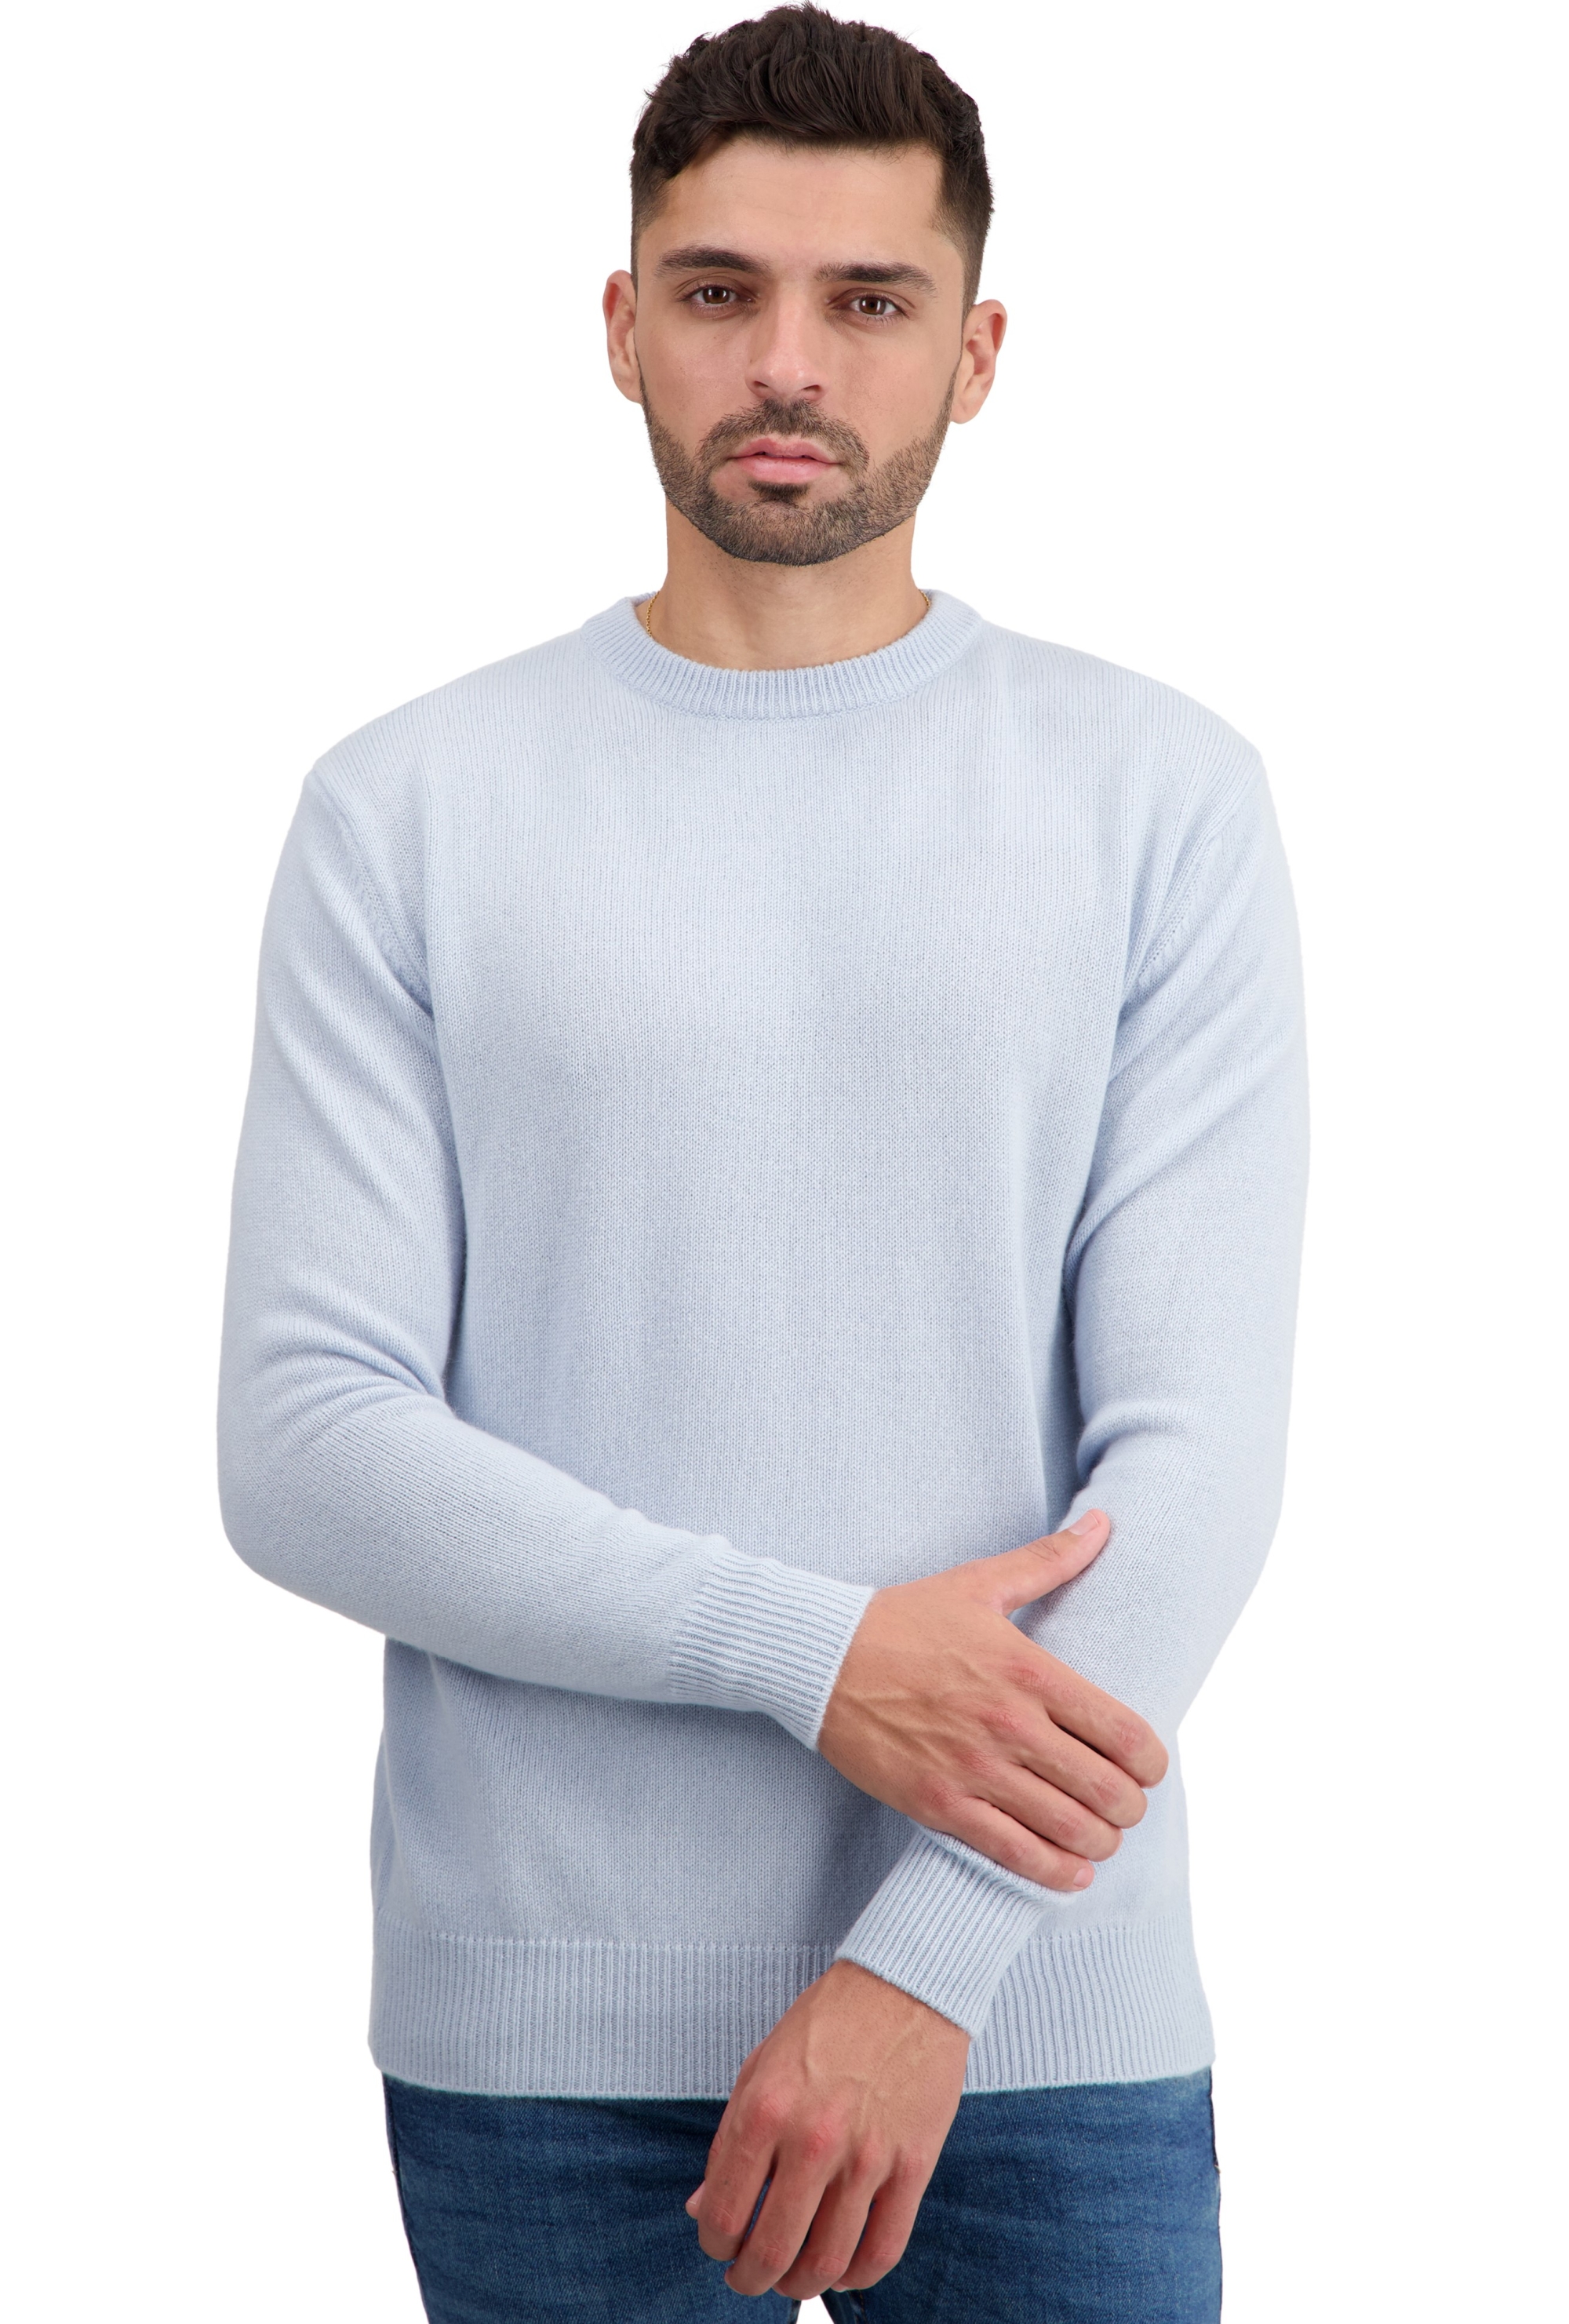 Cashmere men basic sweaters at low prices touraine first whisper s